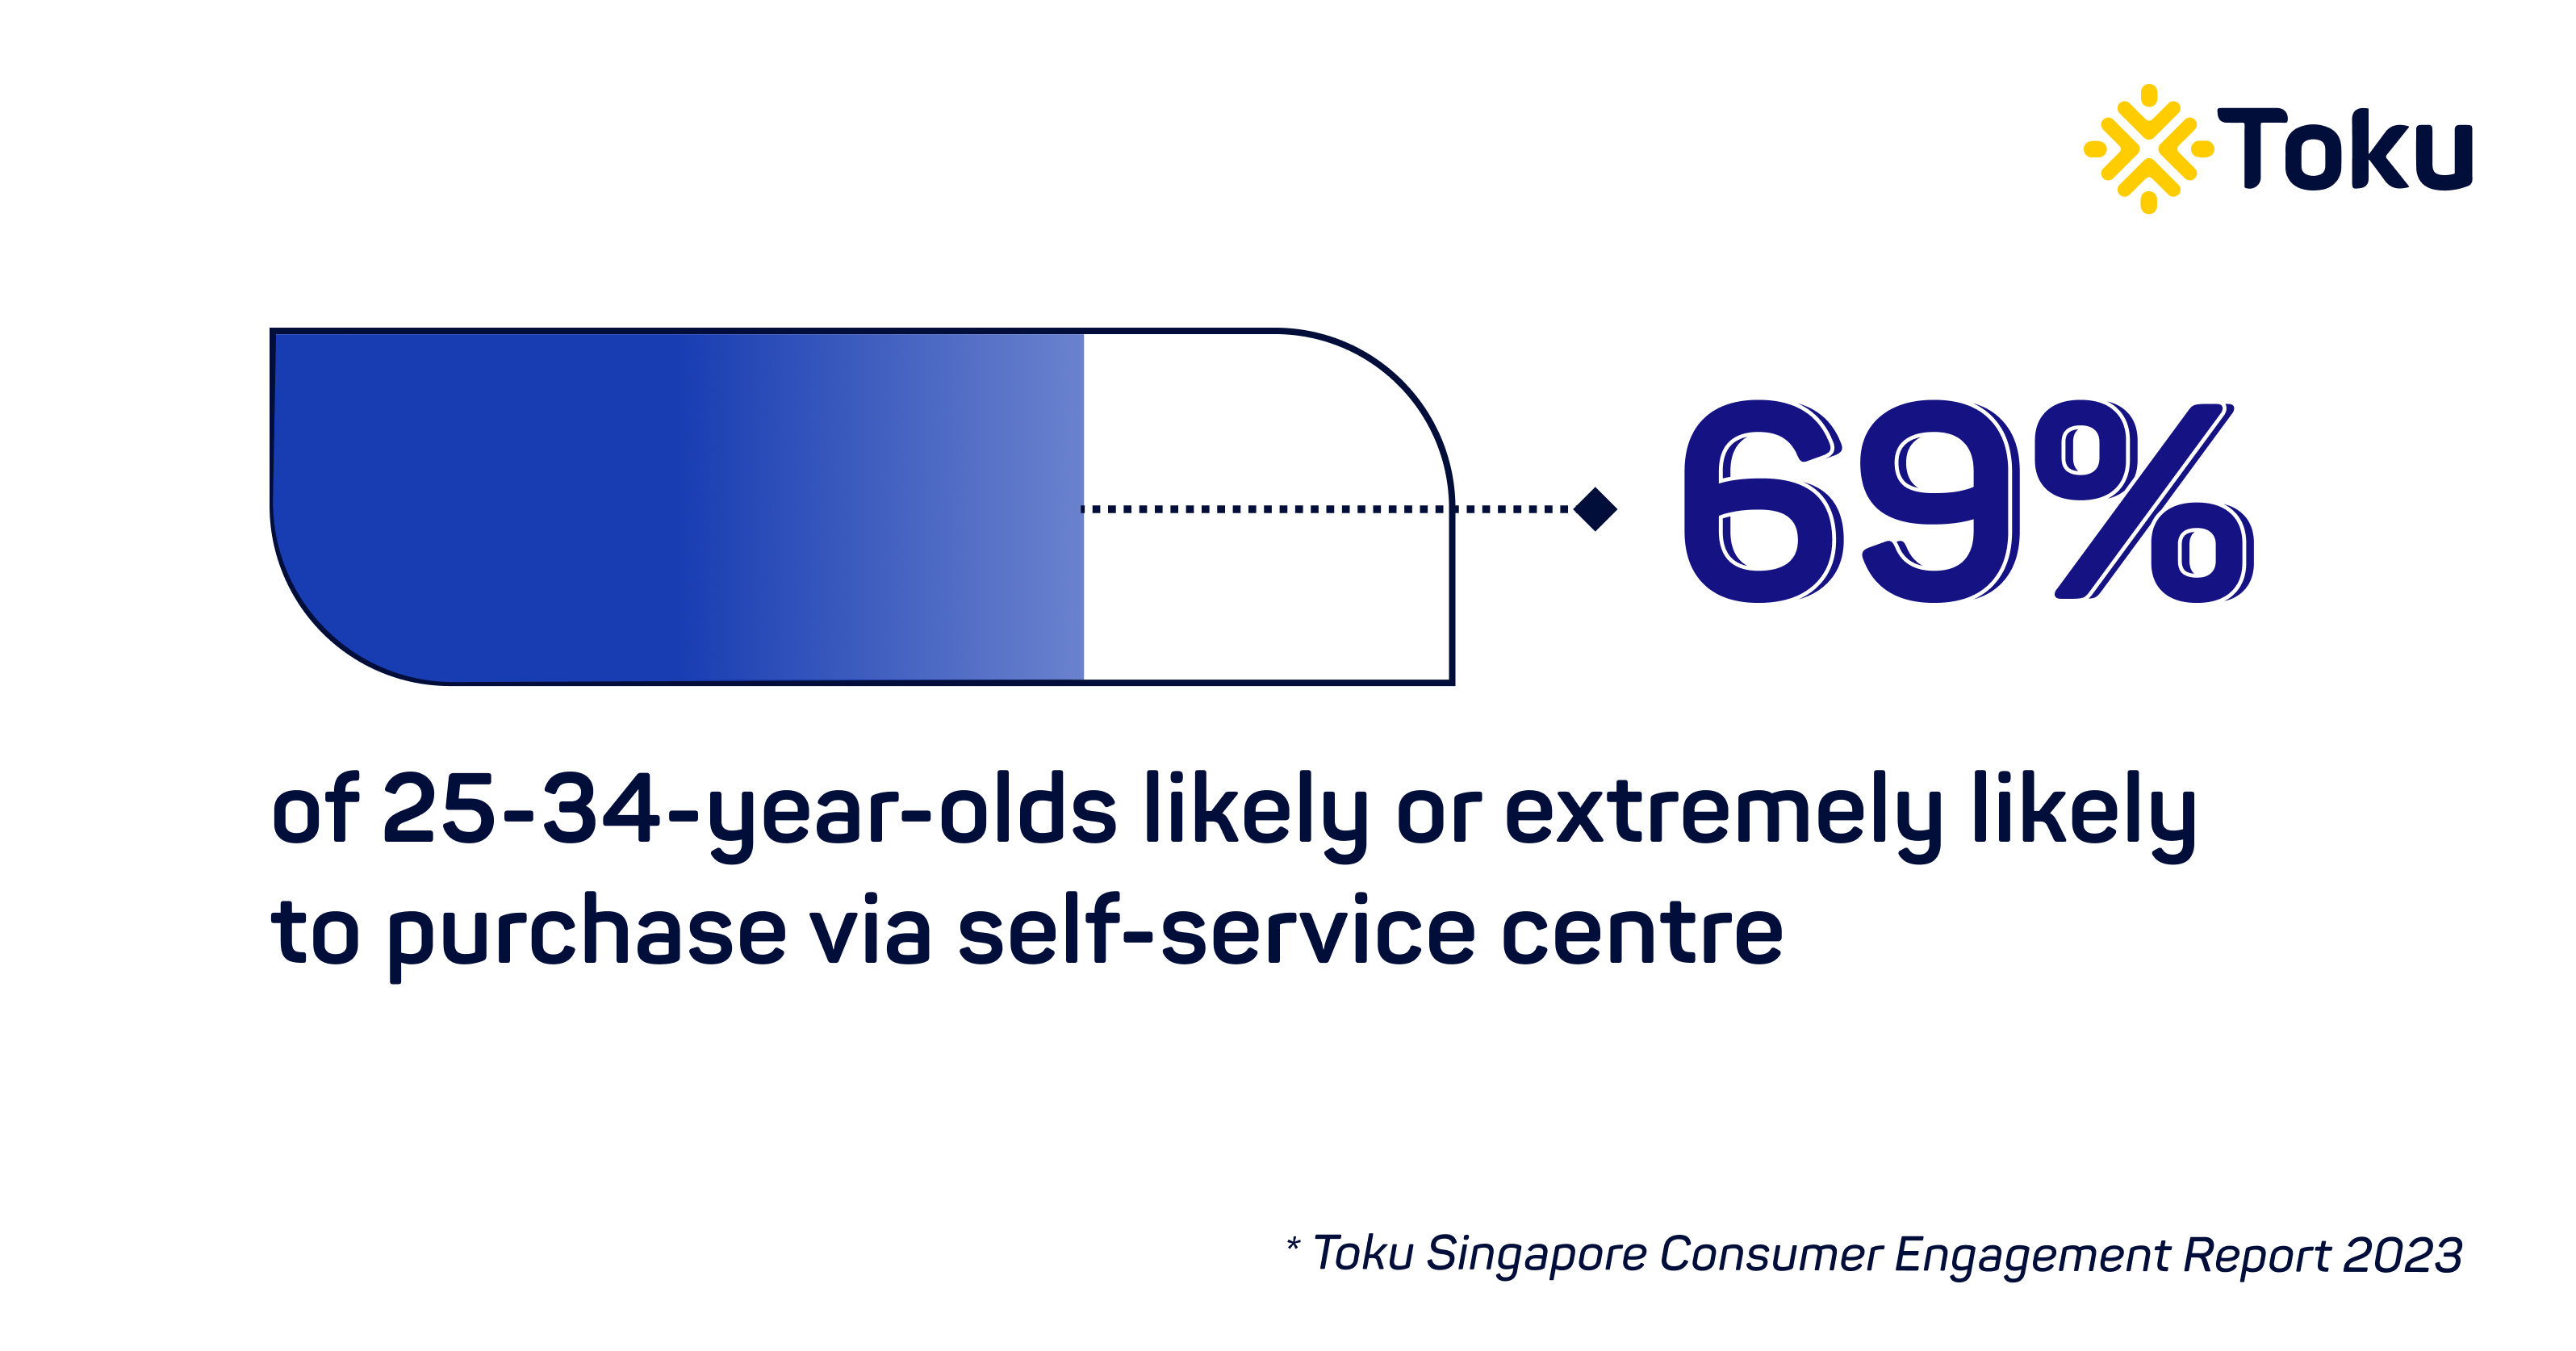 69 percent of 25-34 year olds purchase via self-service centre